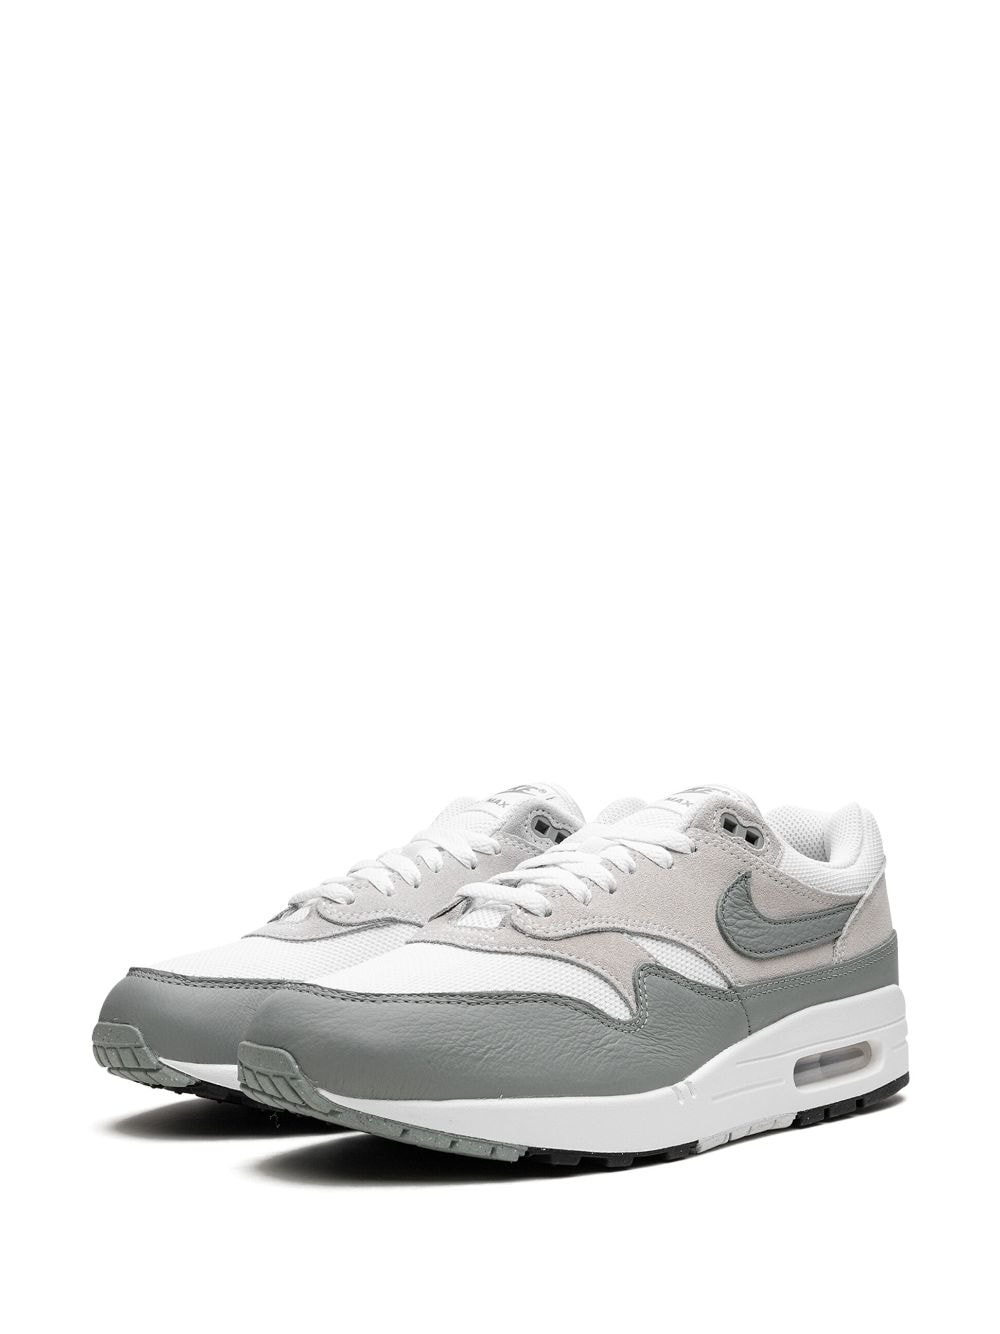 Air Max 1 "White/Mica Green" sneakers - 5